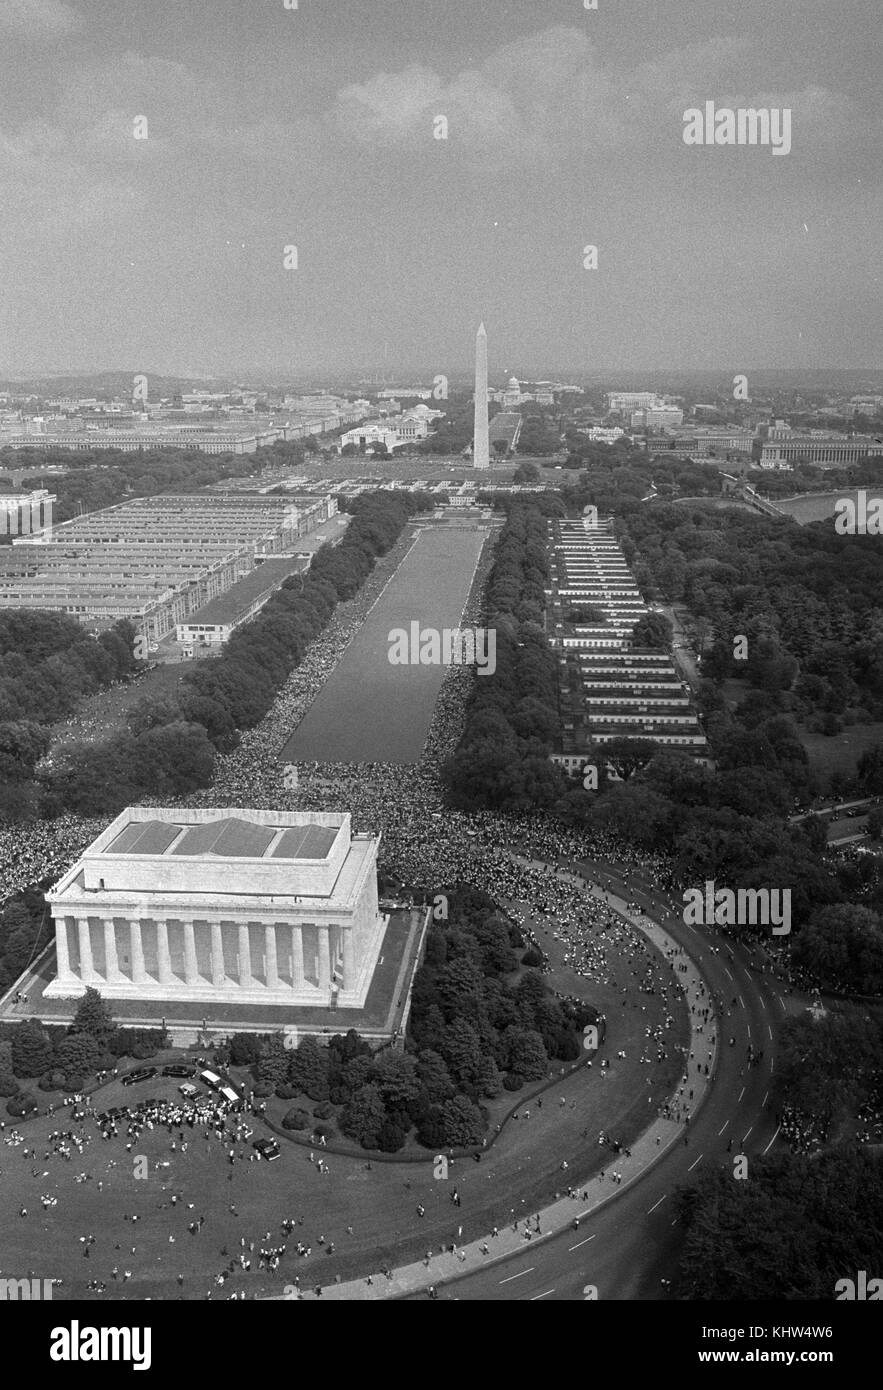 Photograph taken during the March on Washington in 1963. Visible is the Lincoln Monument and the Washington Monument. Dated 20th Century Stock Photo